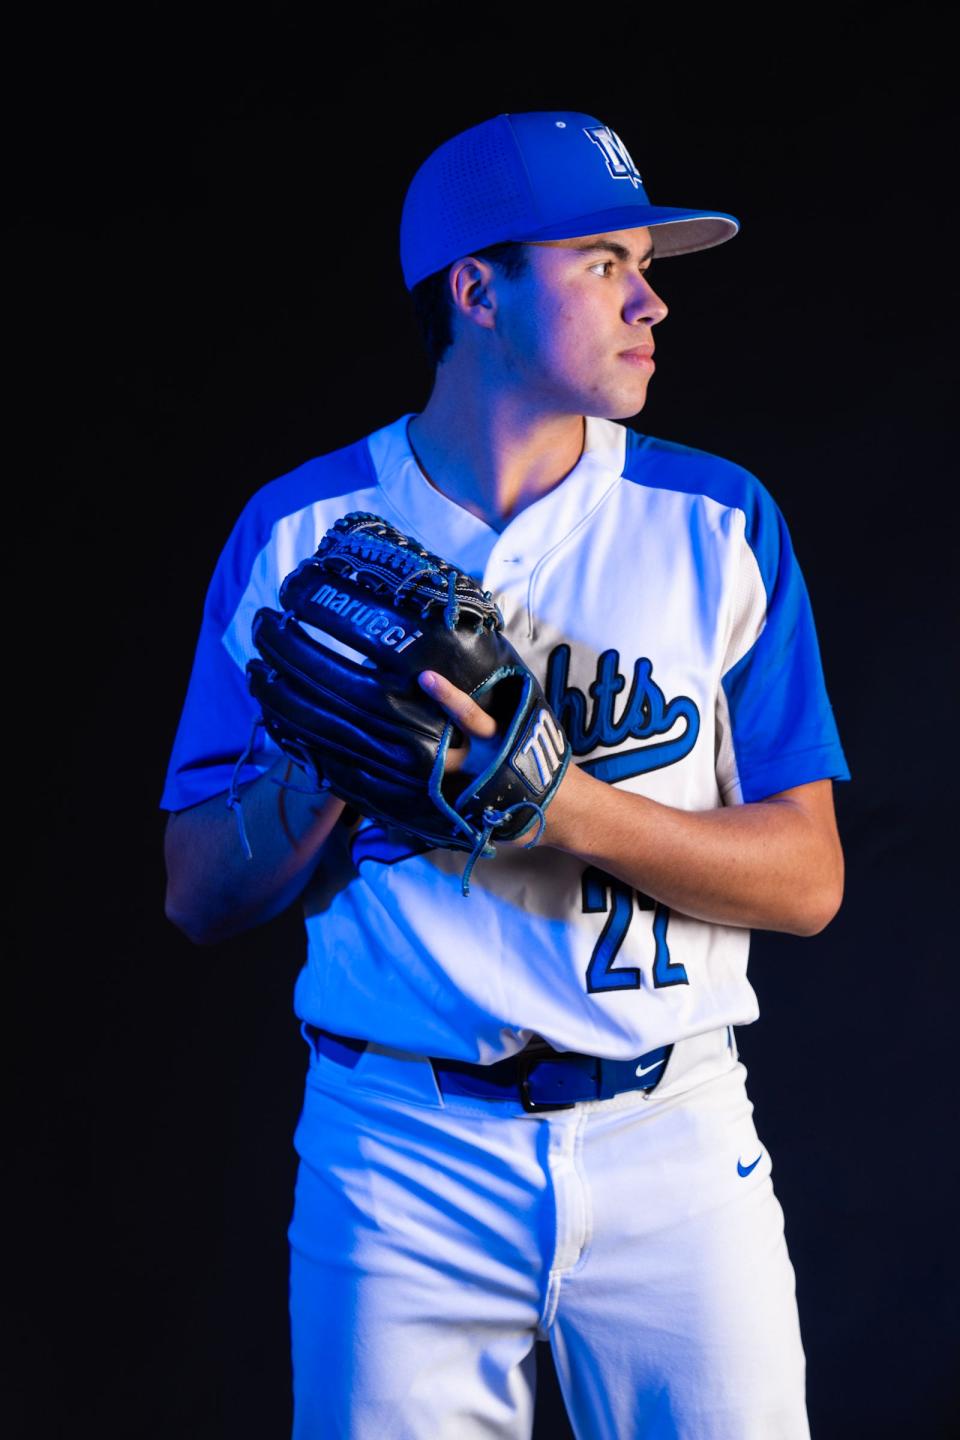 McCallum pitcher and outfielder Nathan Nagy said his favorite high school baseball memories happened during his freshman year, because during the pandemic, playing baseball was his only contact with his teammates in 2021.